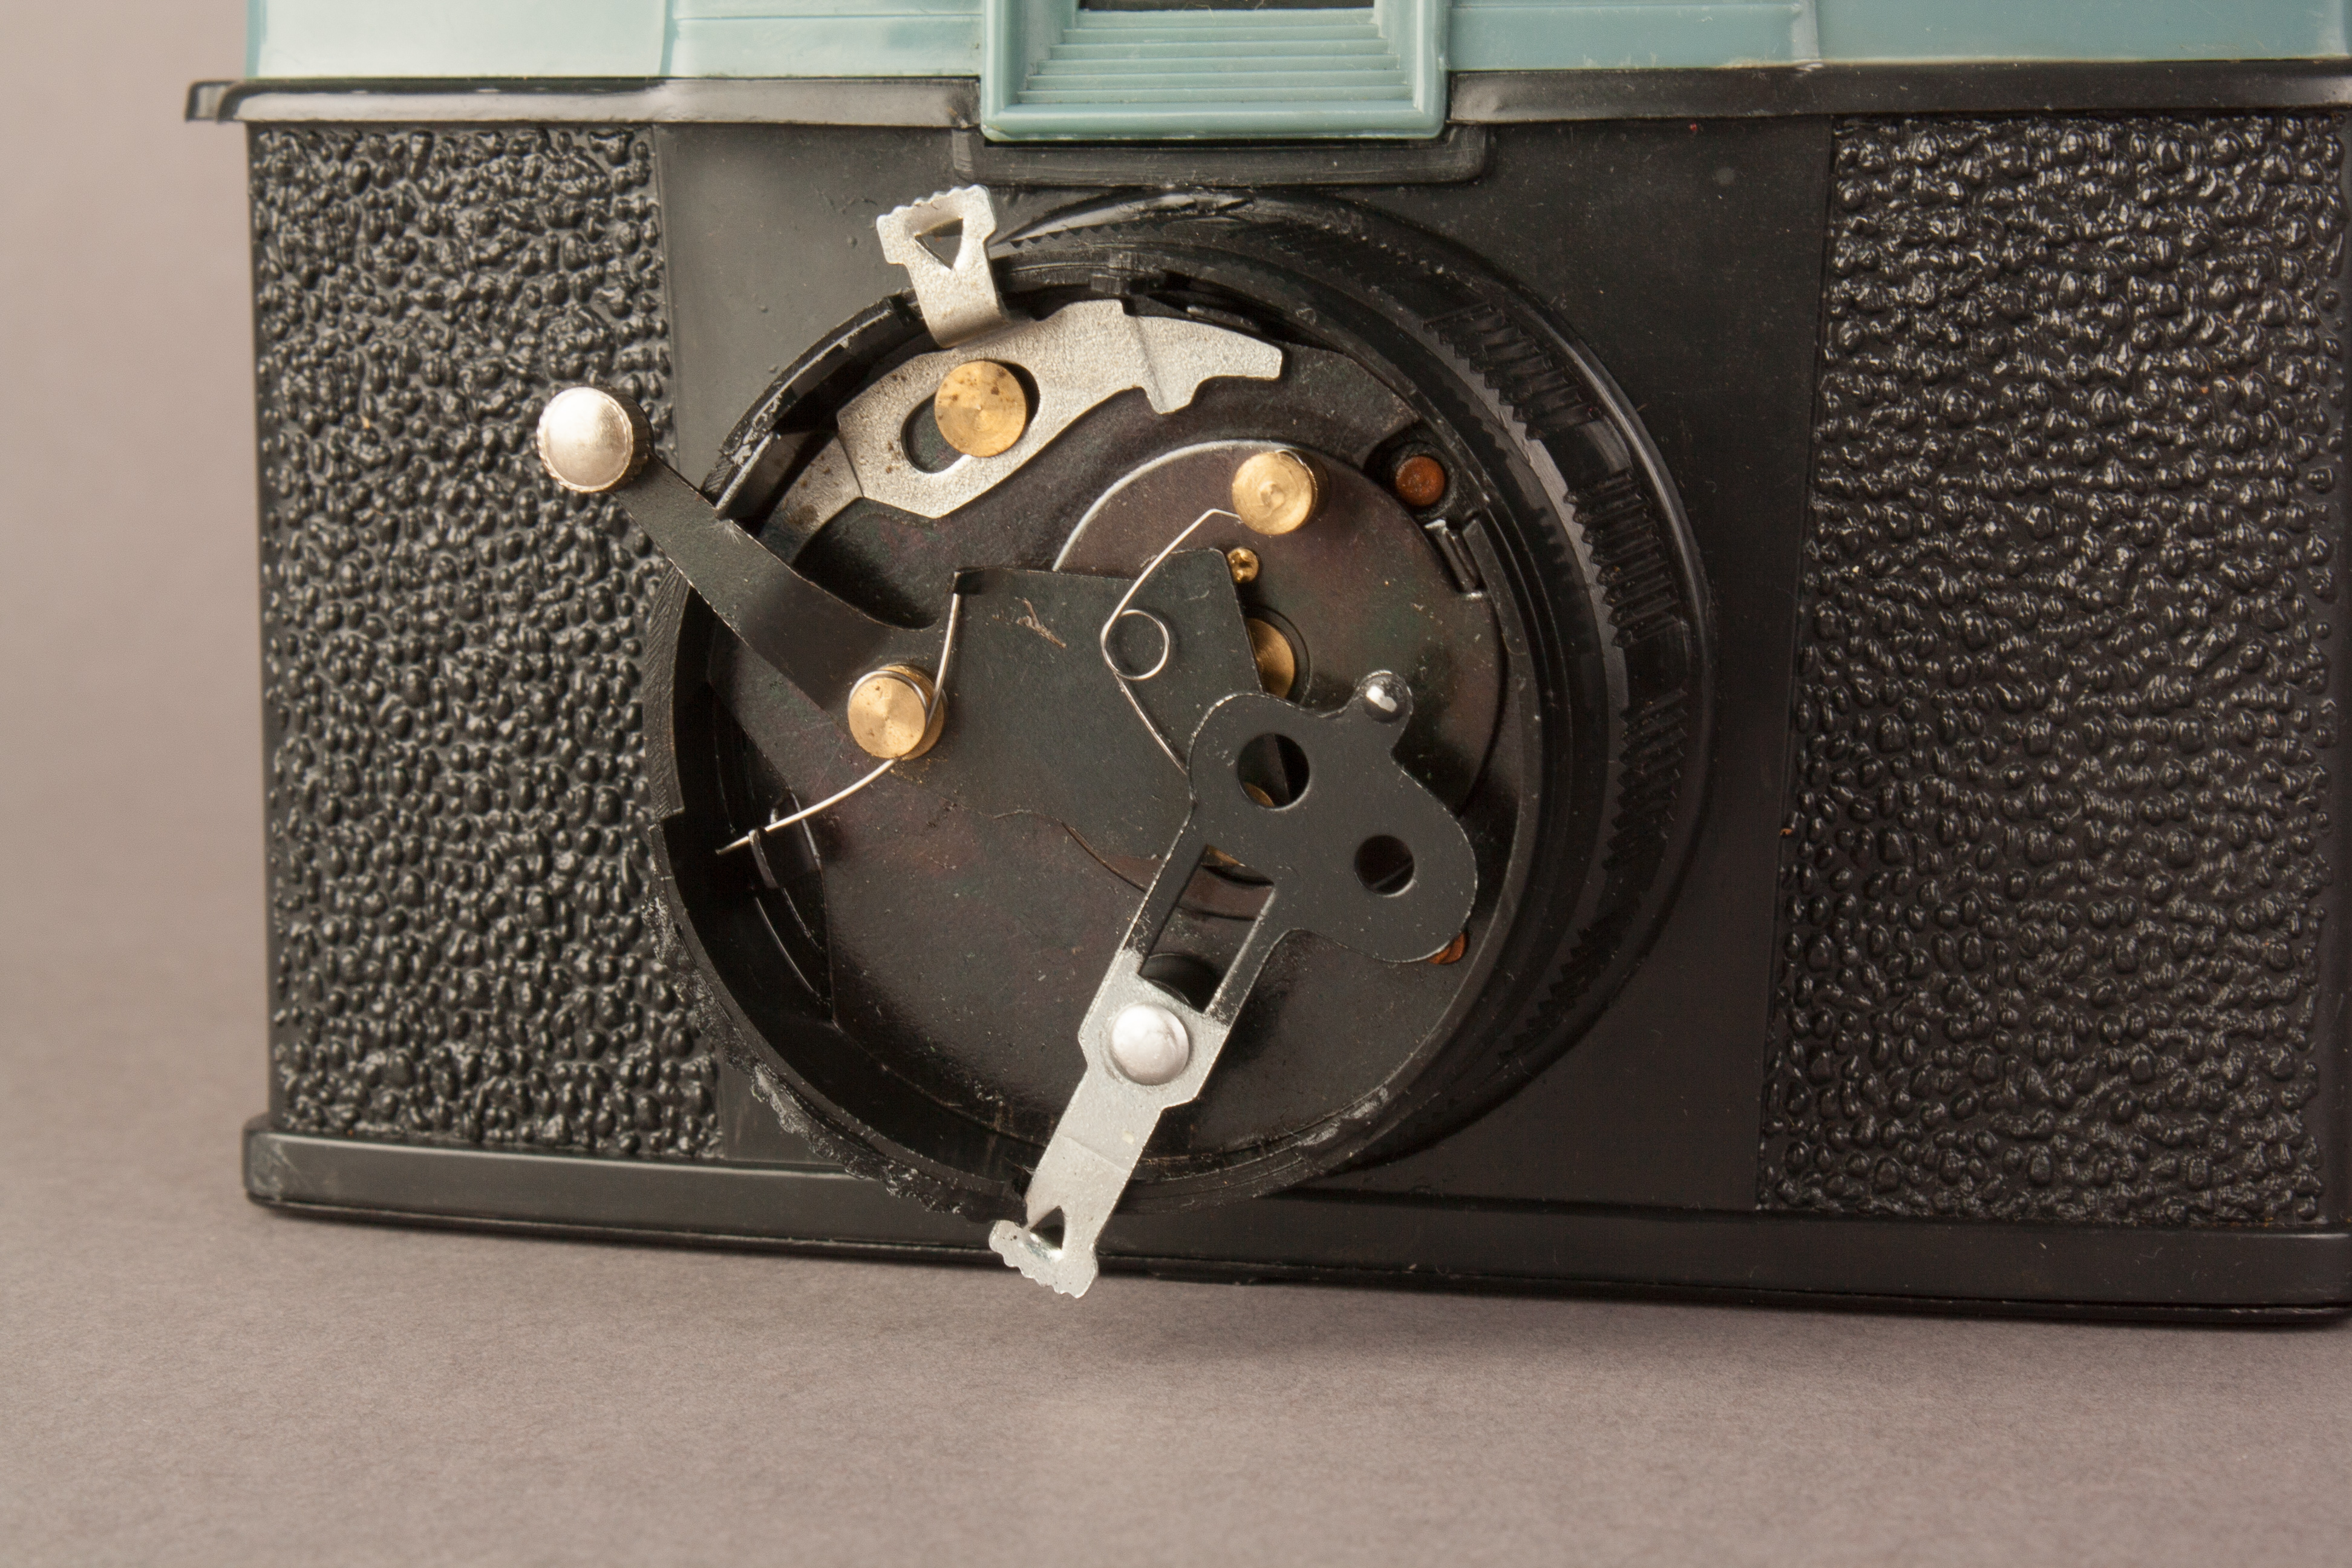 A picture showing the Diana F shutter mechanism